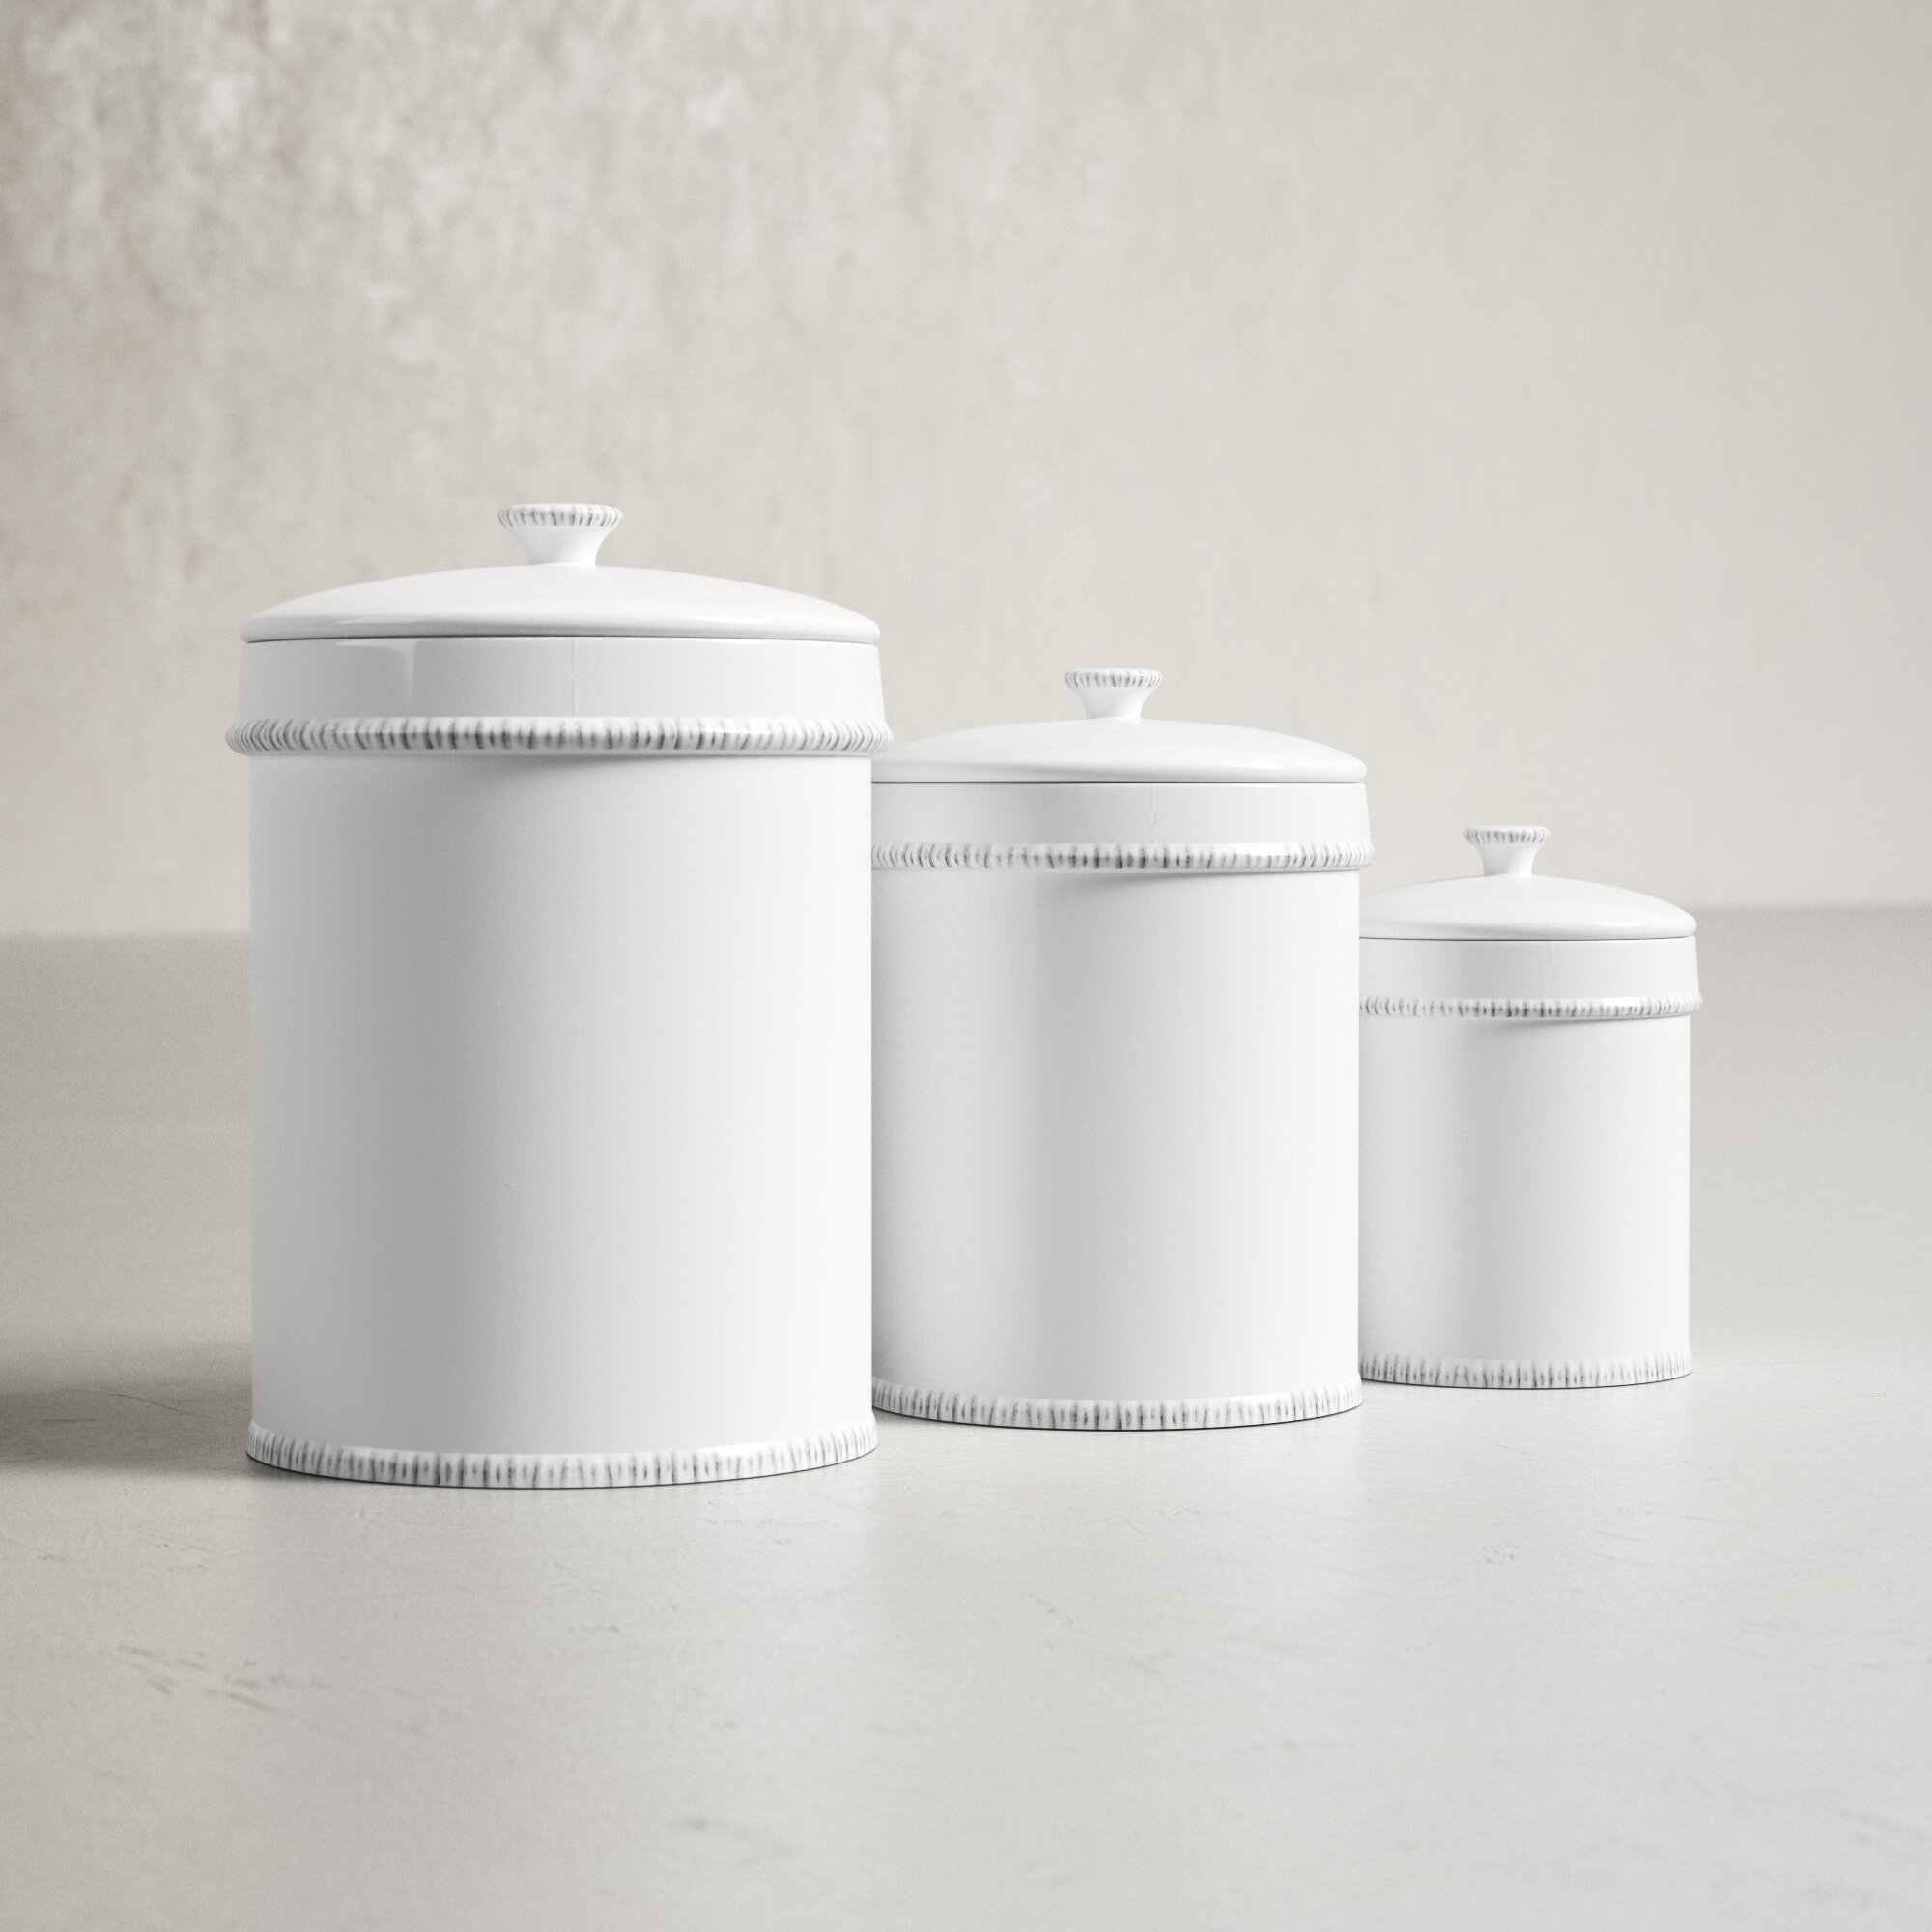 Wayfair | Vacuum Sealed Kitchen Canisters  Jars You'll Love in 2022